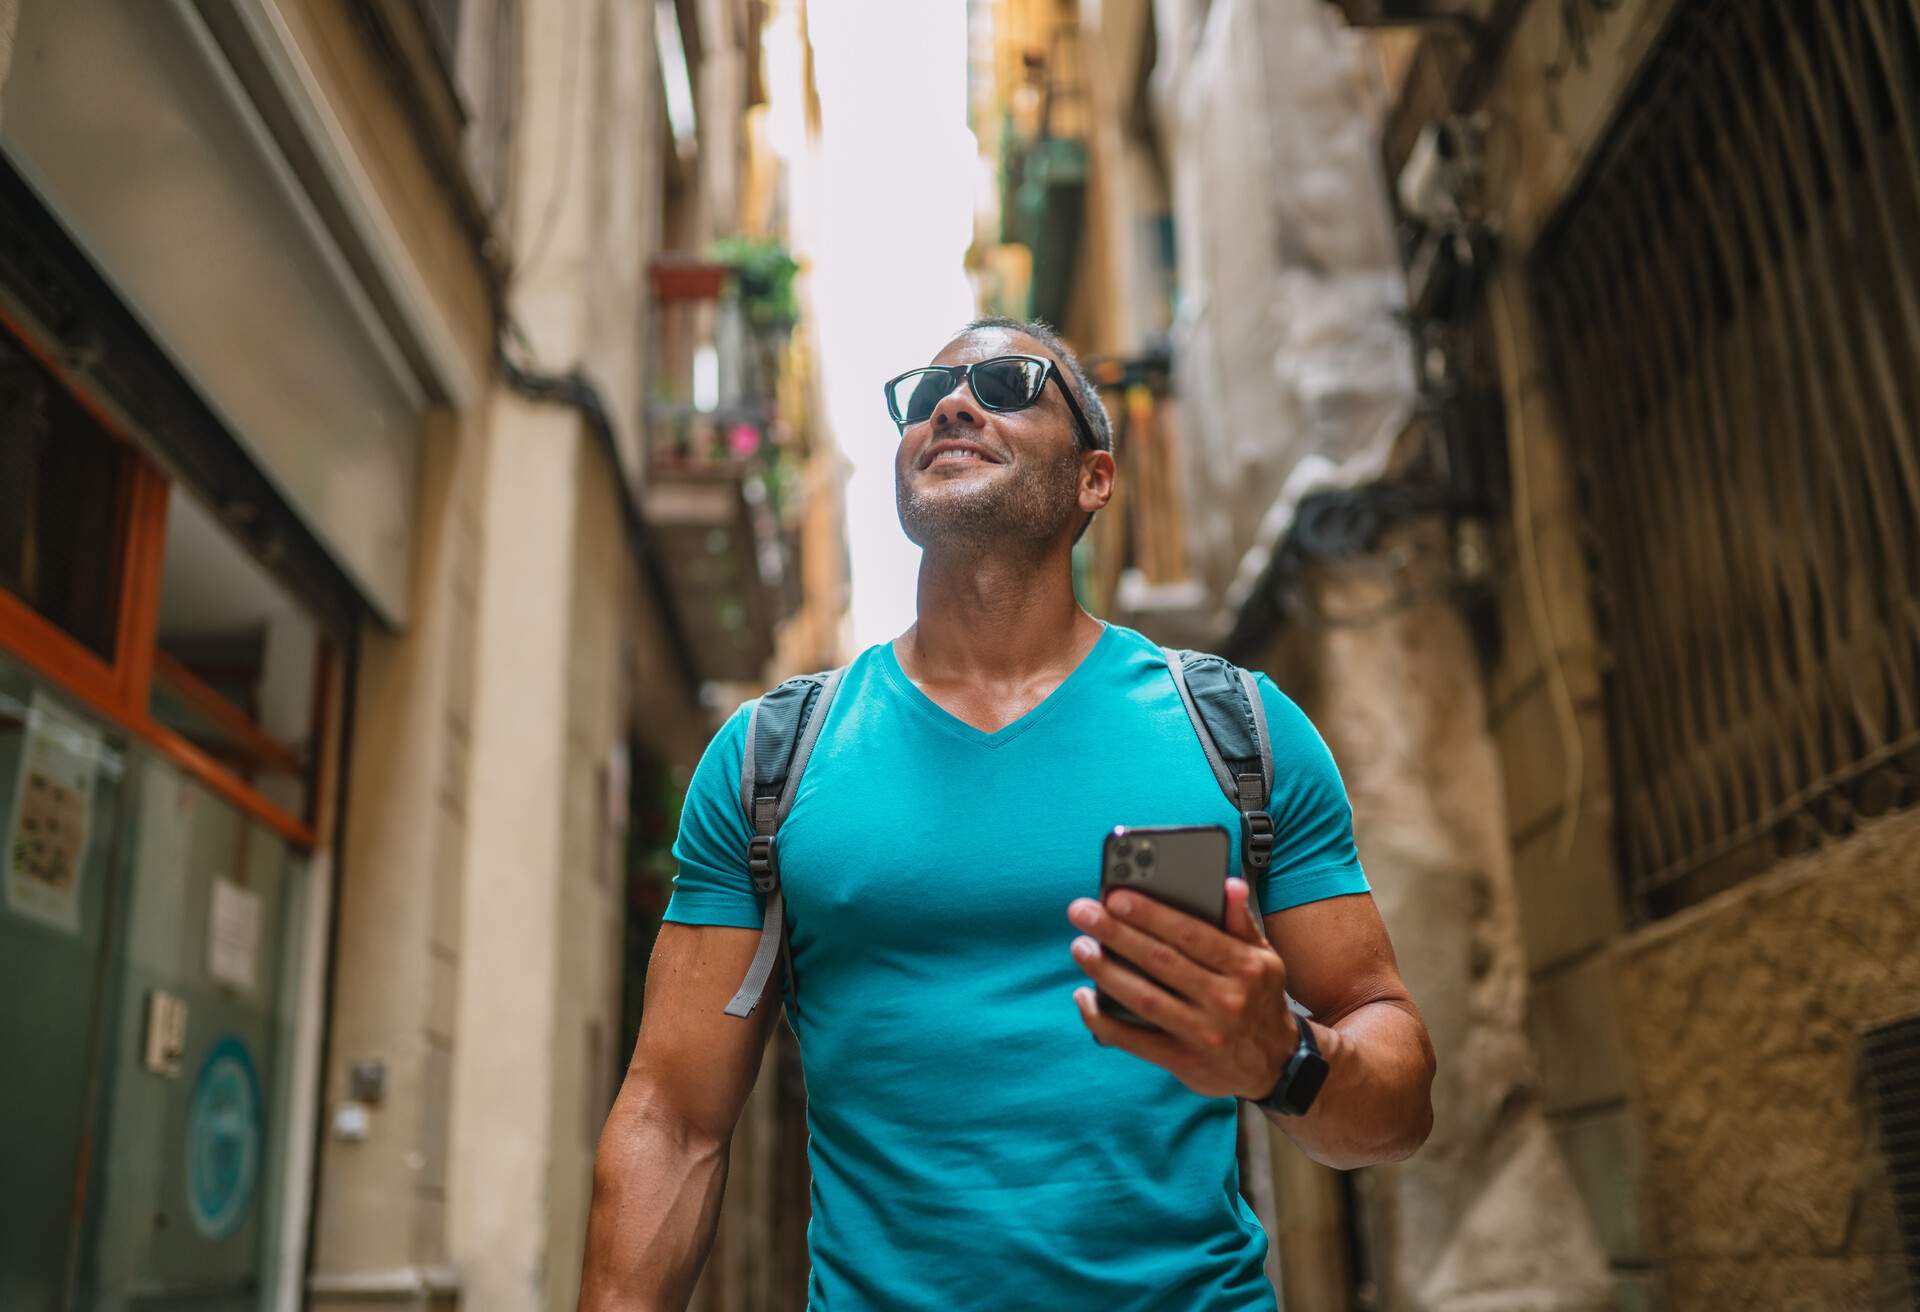 Smiling man holding his smartphone while roaming an old town street.